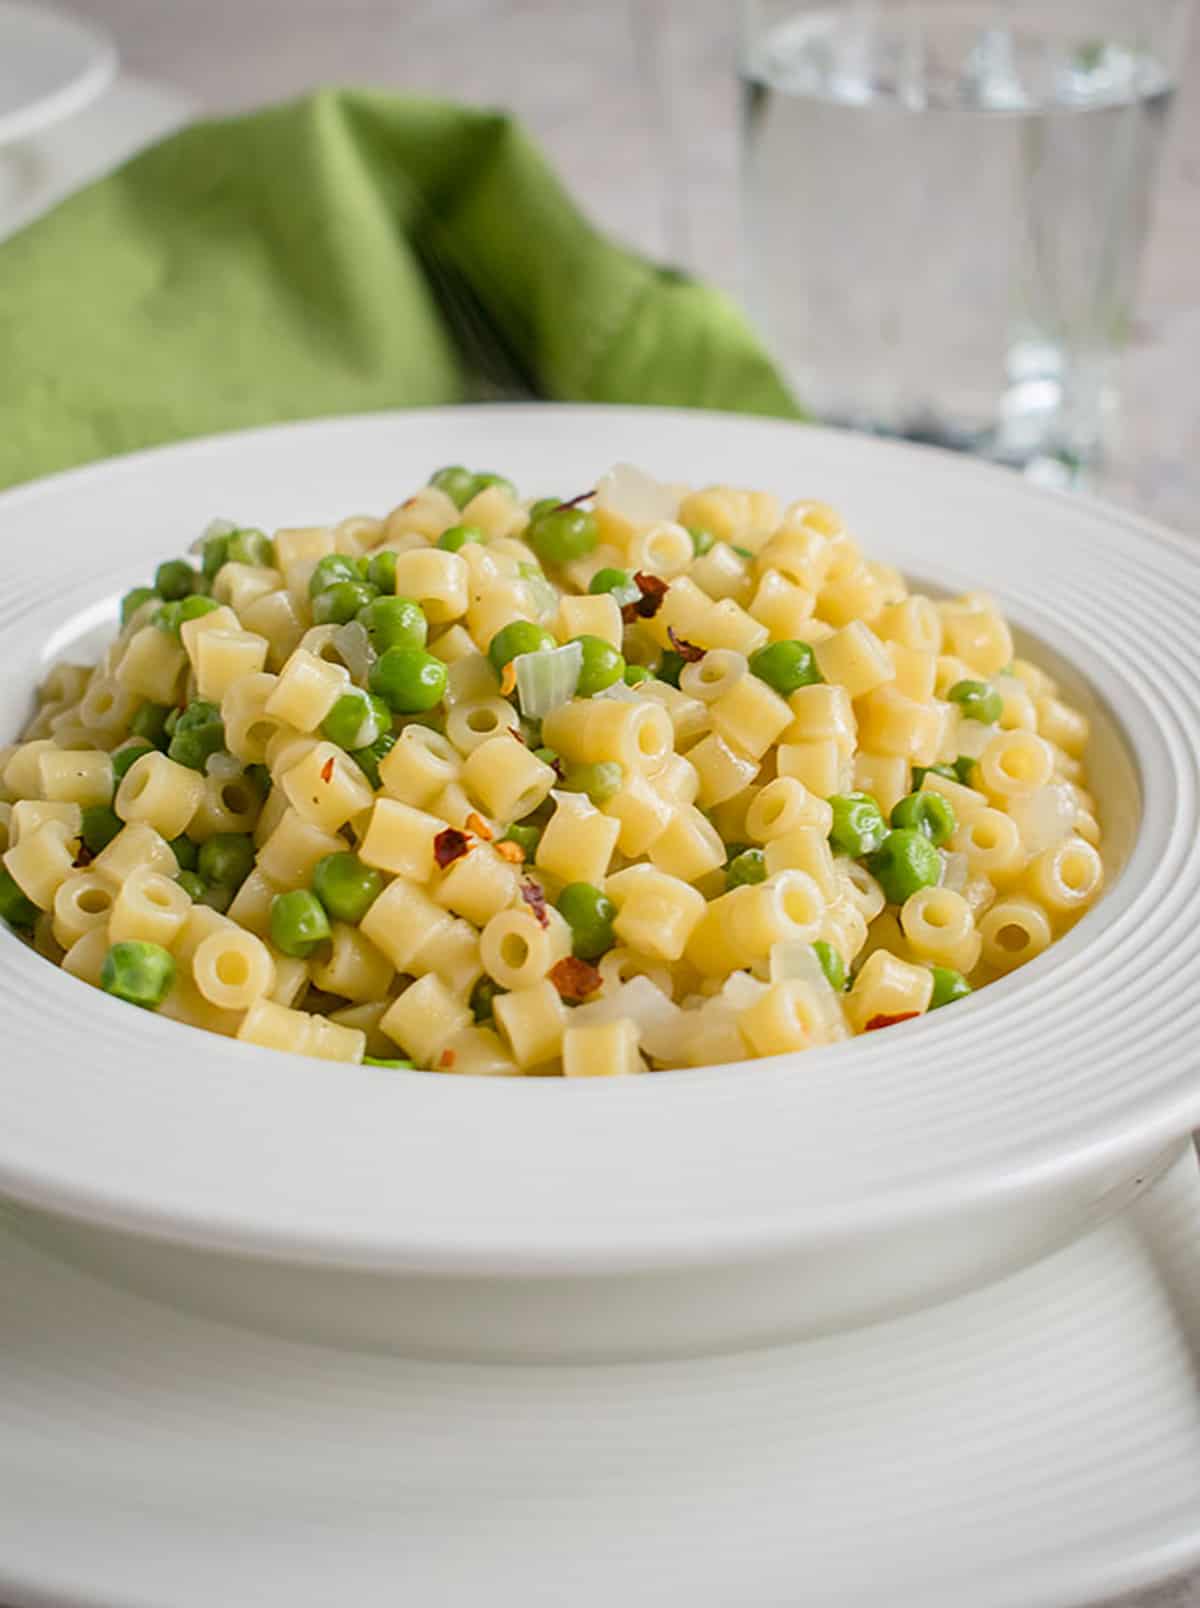 close-up photo of a bowl of pasta e piselli (pasta with peas)